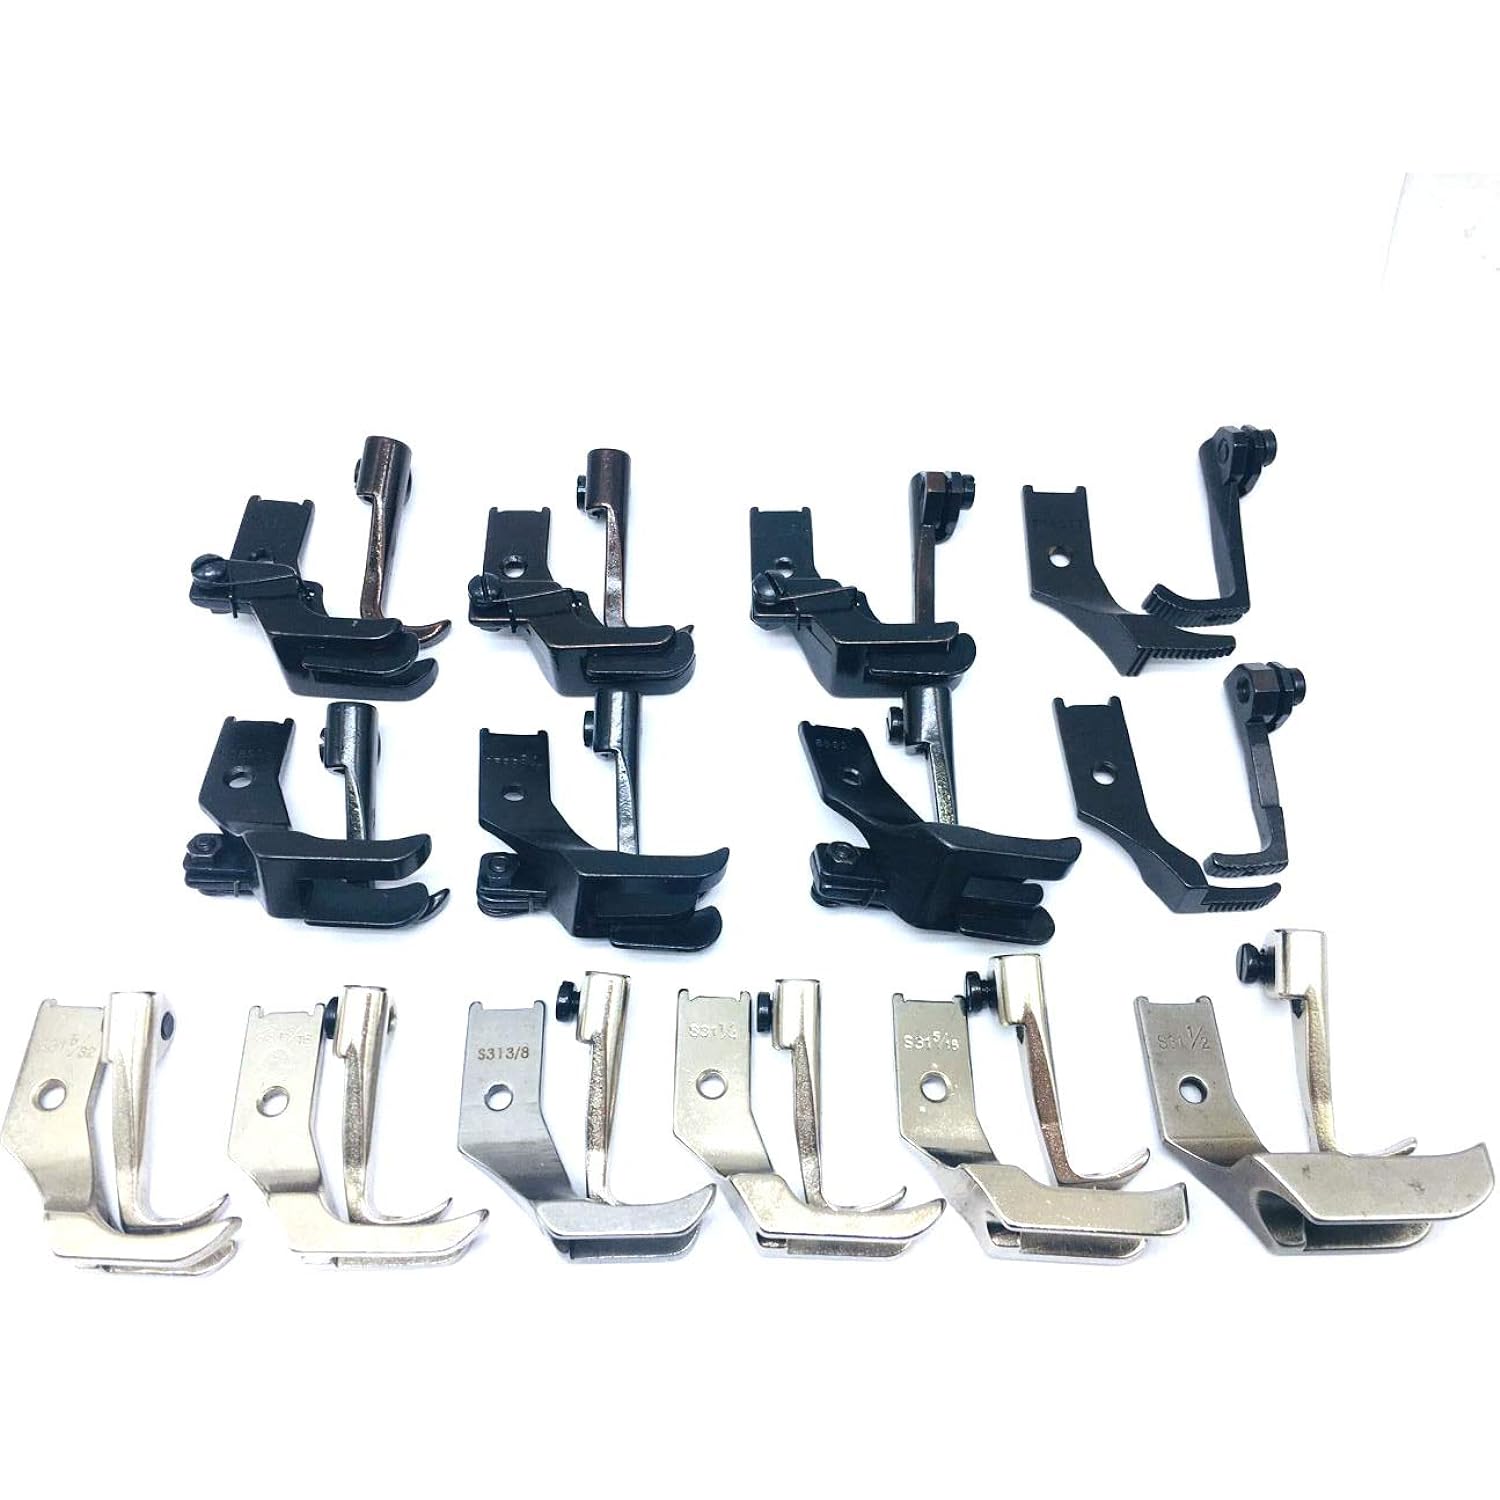 Great Choice Products 14Set Walking Presser Feet Fit For Juki Consew Singer Brother Industrial Sewing (Hm-Wf14)